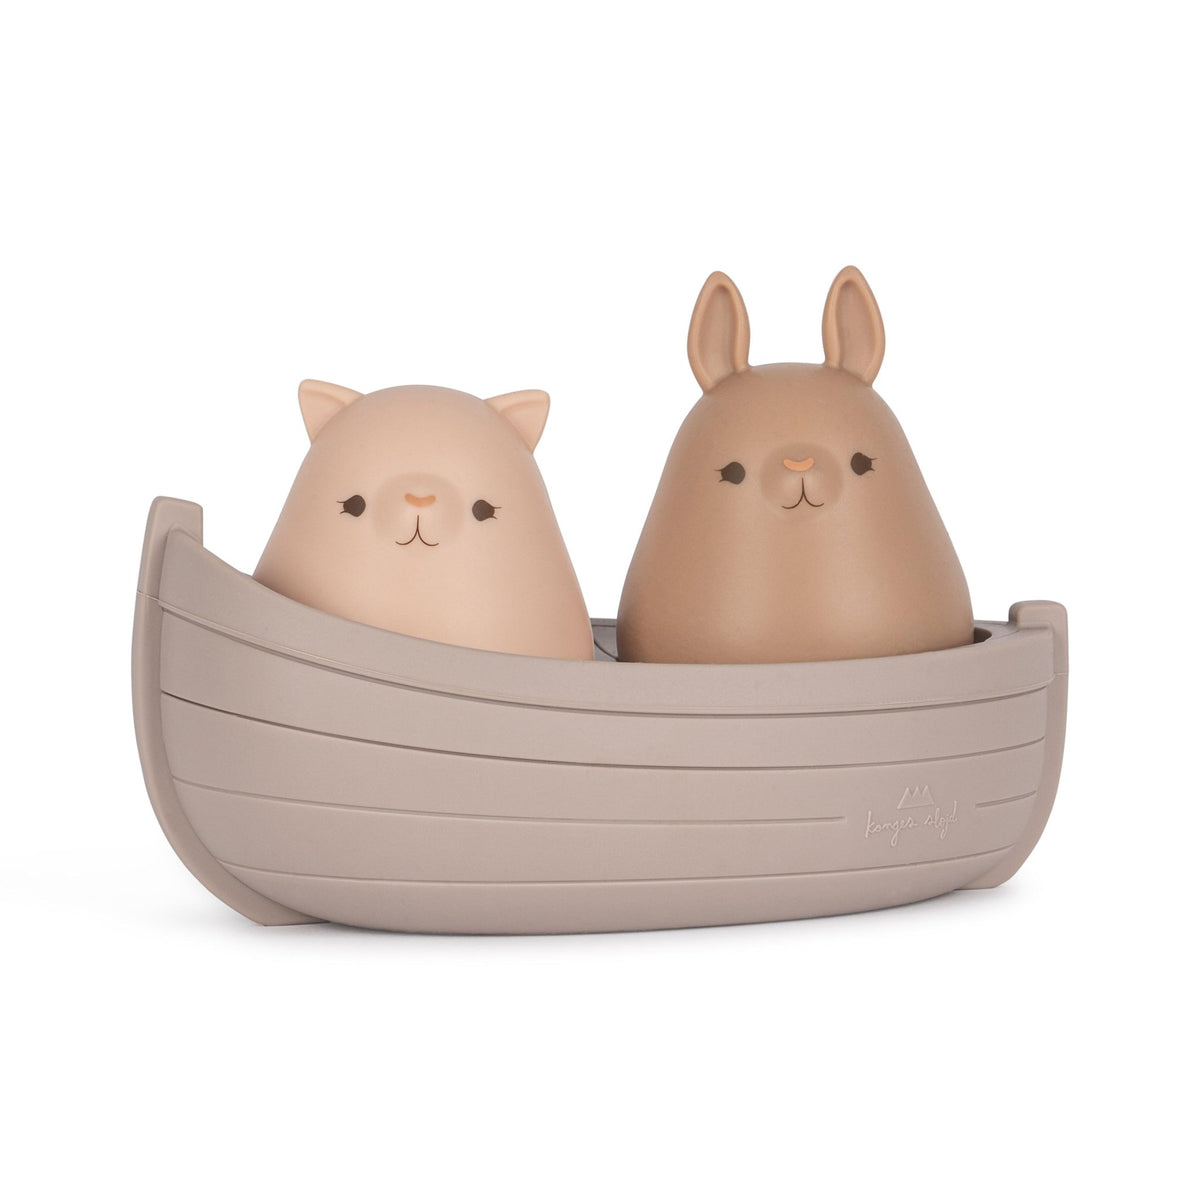 2 Pack of Silicone Boat Bath Toys by Konges Sløjd - Maude Kids Decor